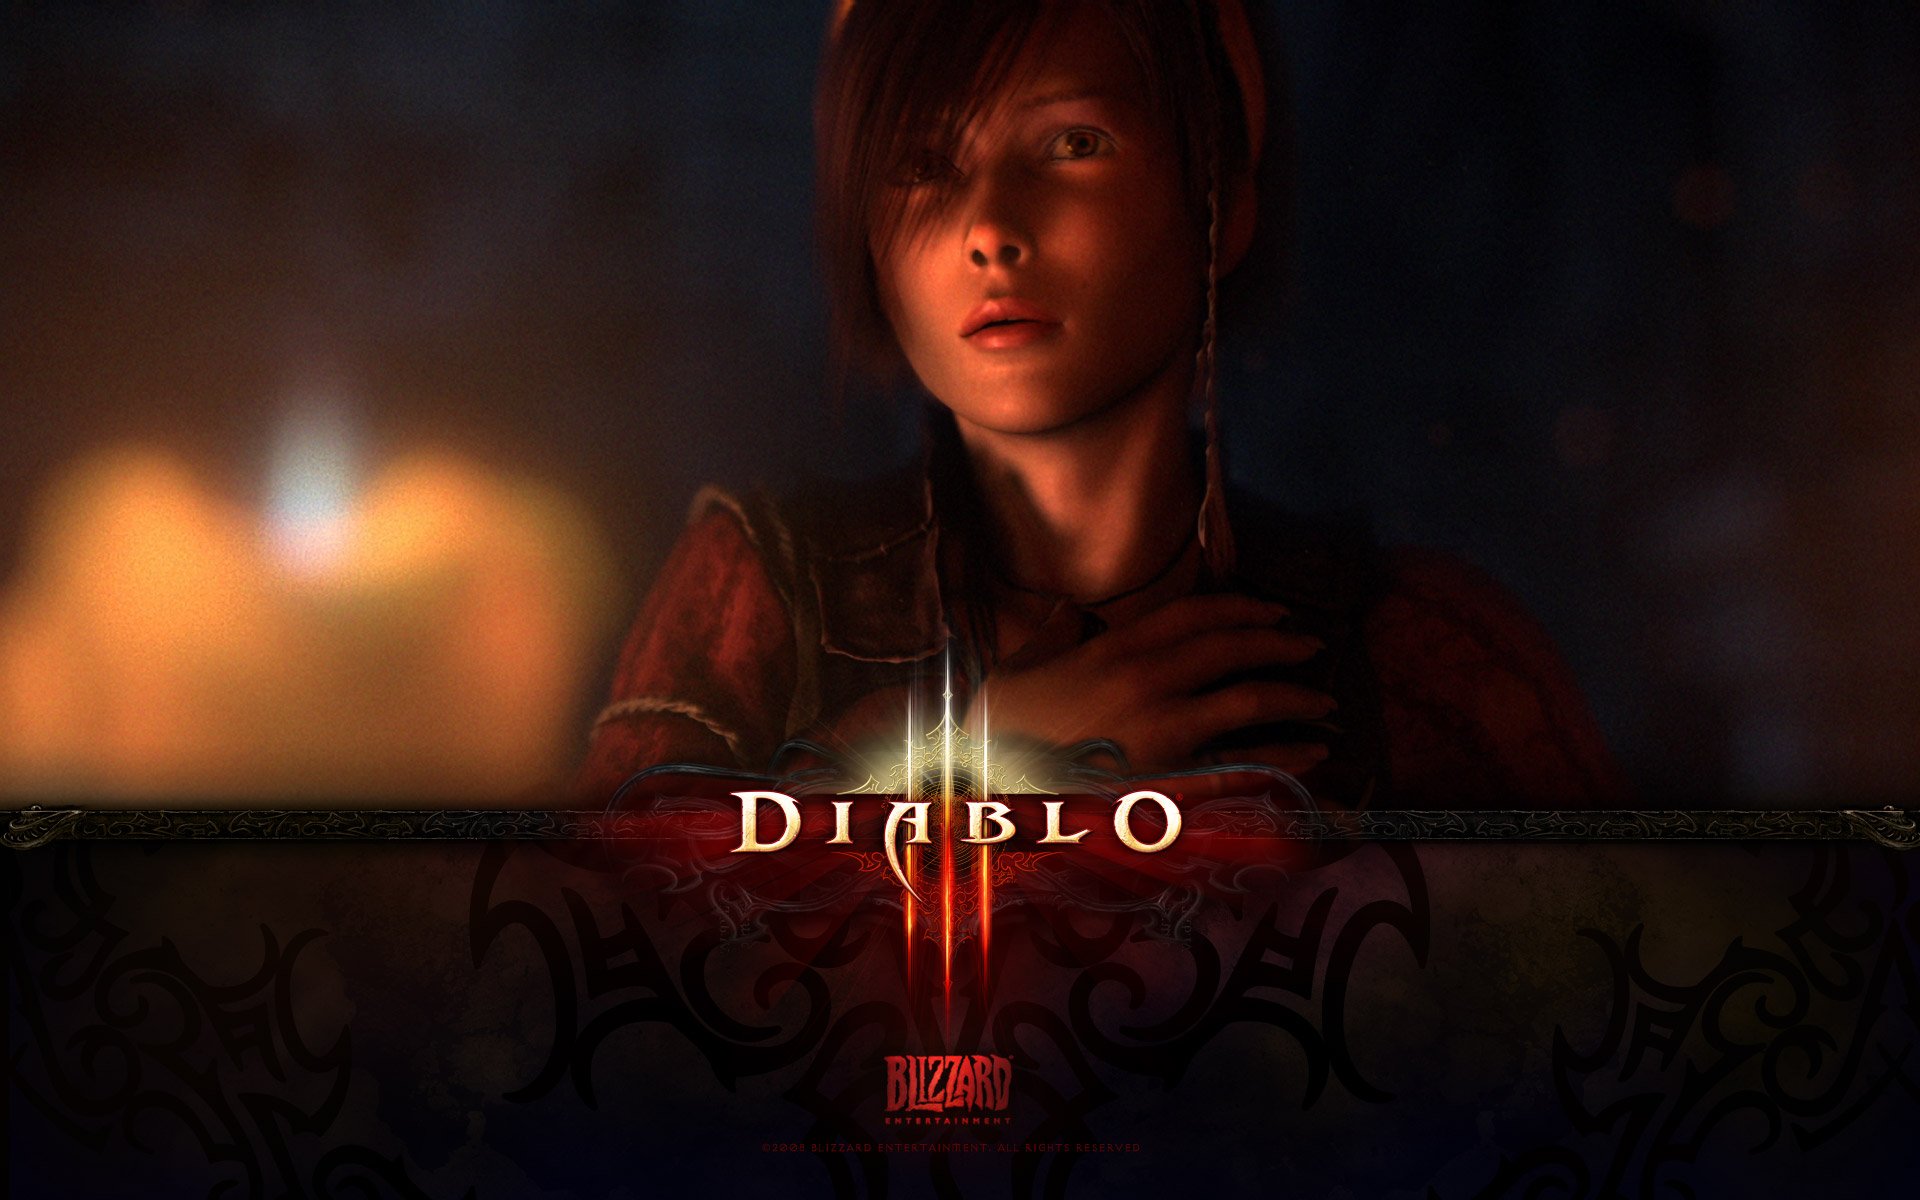 Leah, the character from Diablo III, in a high definition desktop wallpaper.